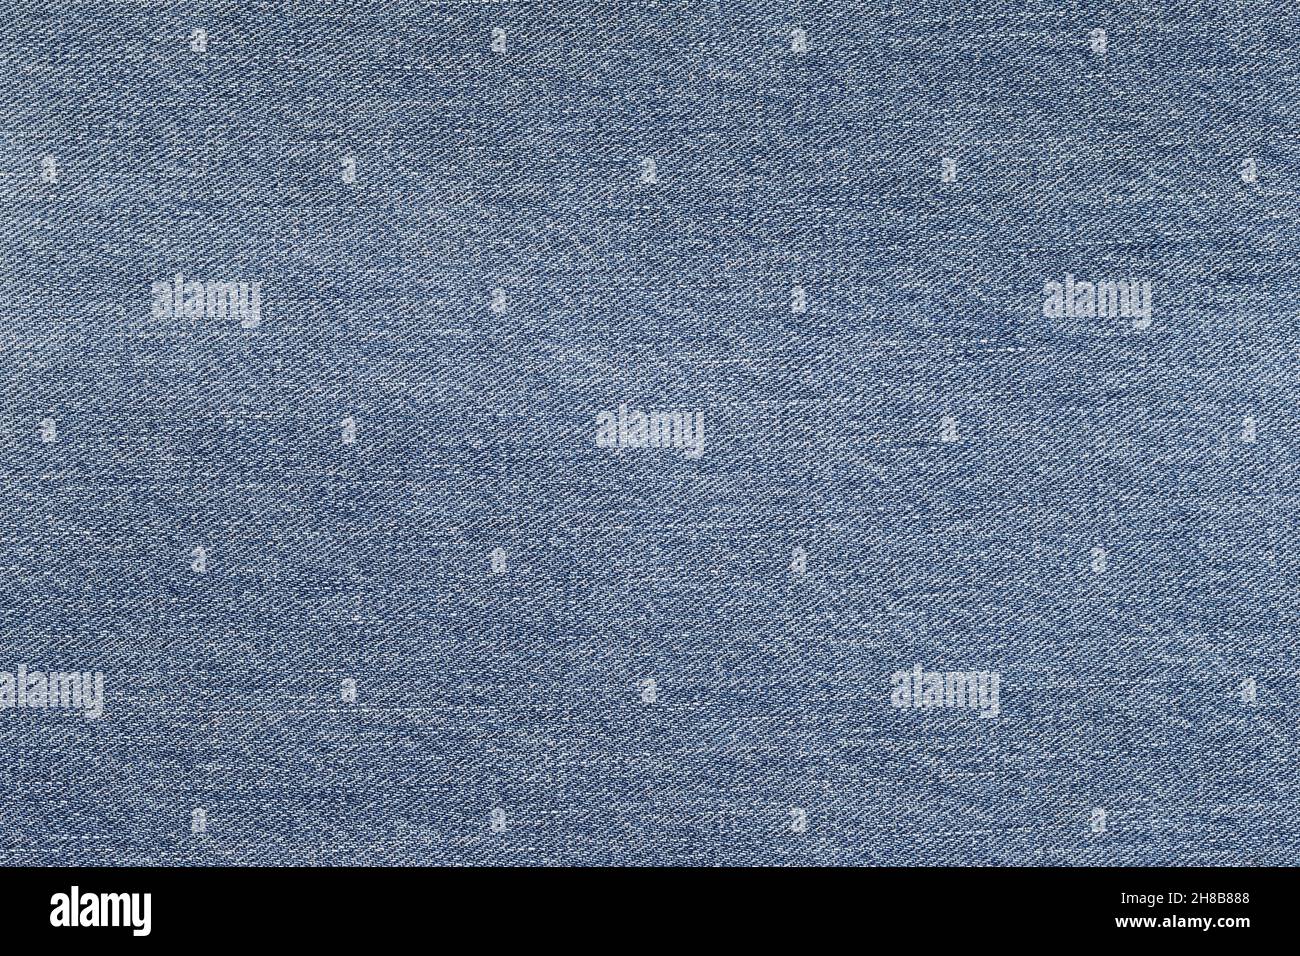 Denim background in blue fabric with faded. Blue discolored jeans close ...